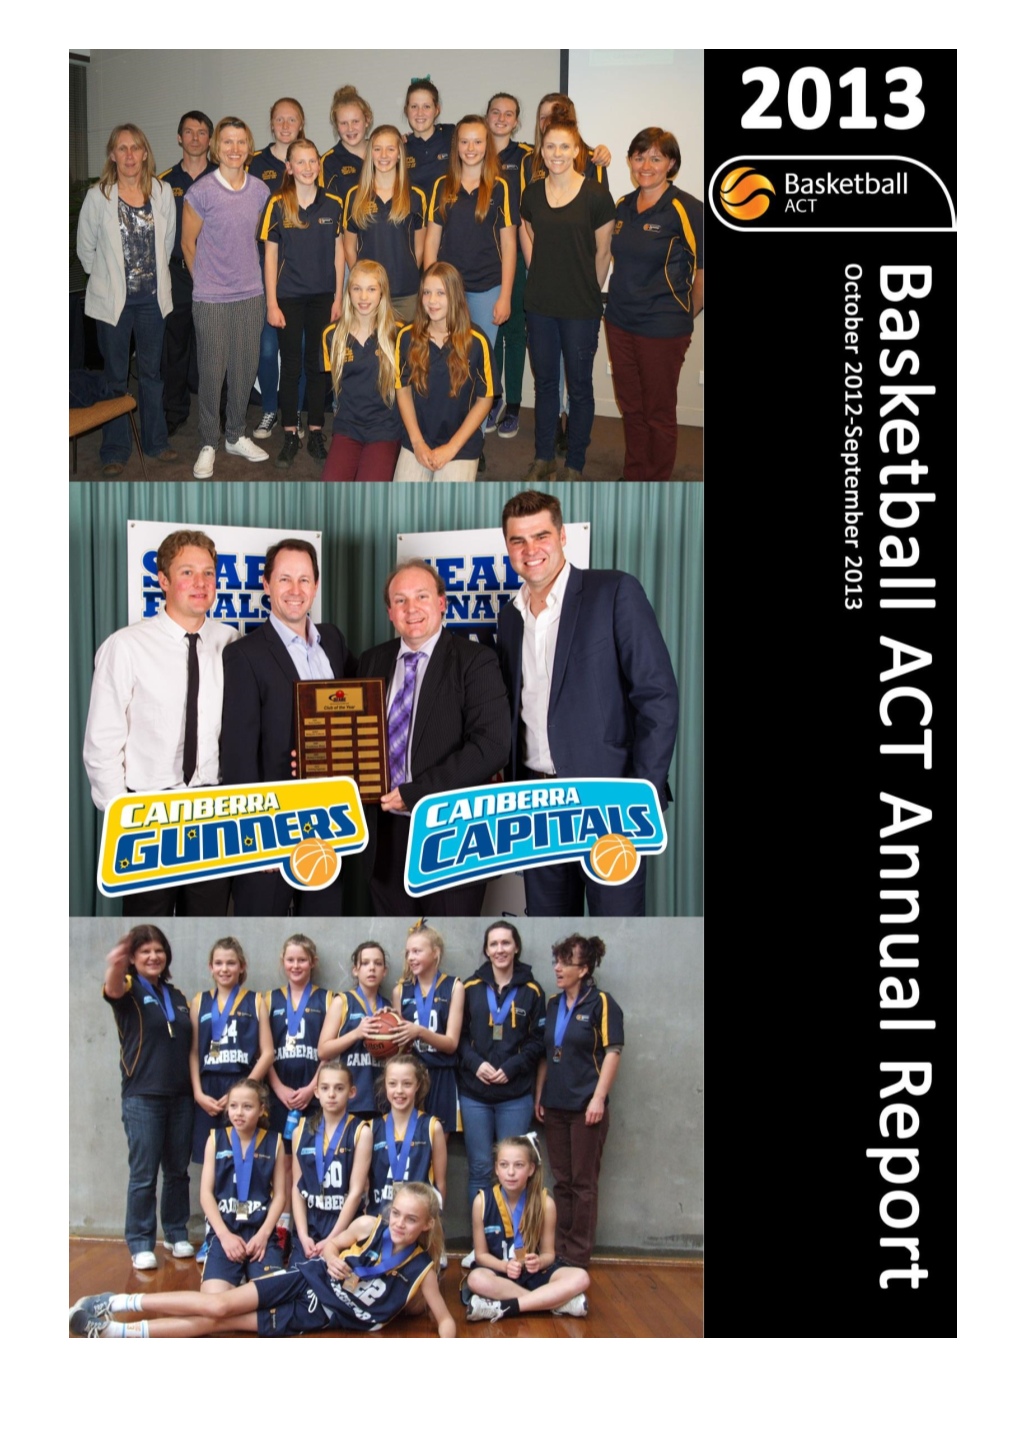 A.C.T. Basketball Inc. Annual Report